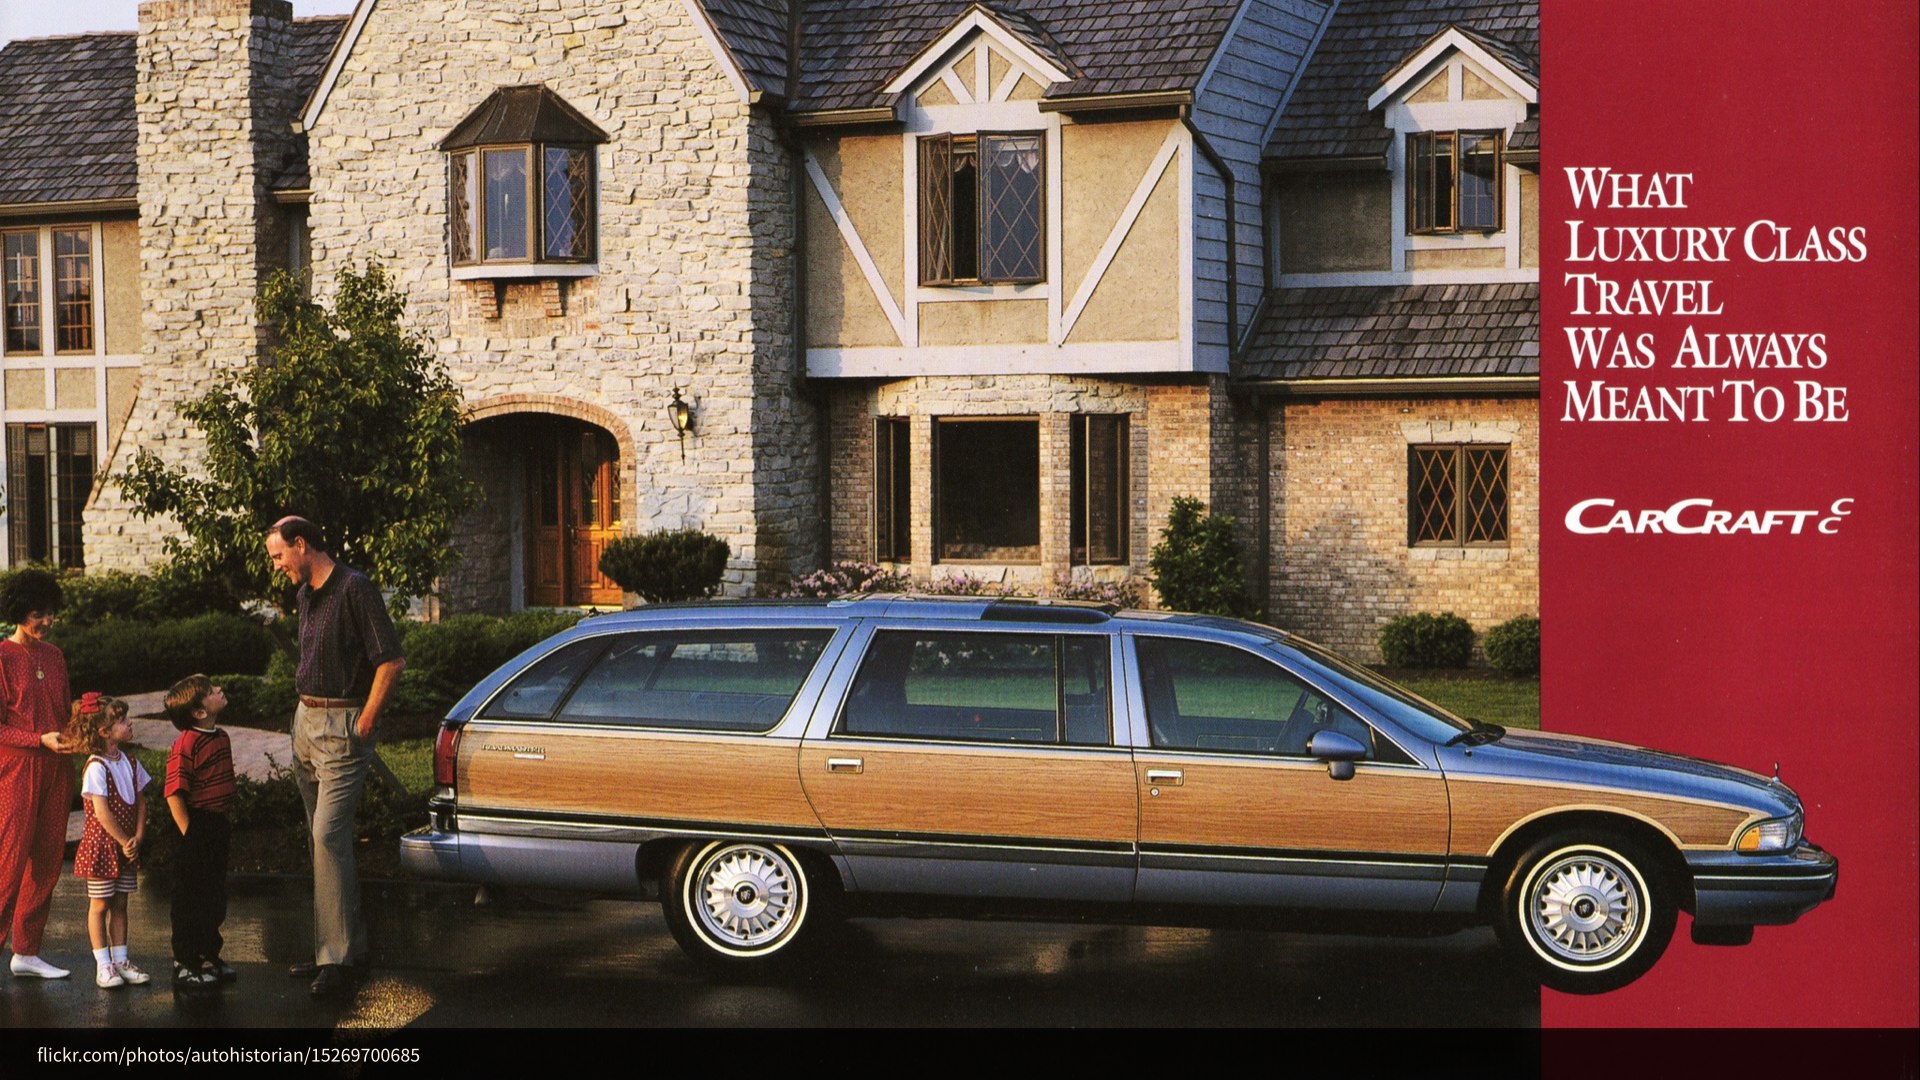 A dated advertisement for a wood-paneled station wagon